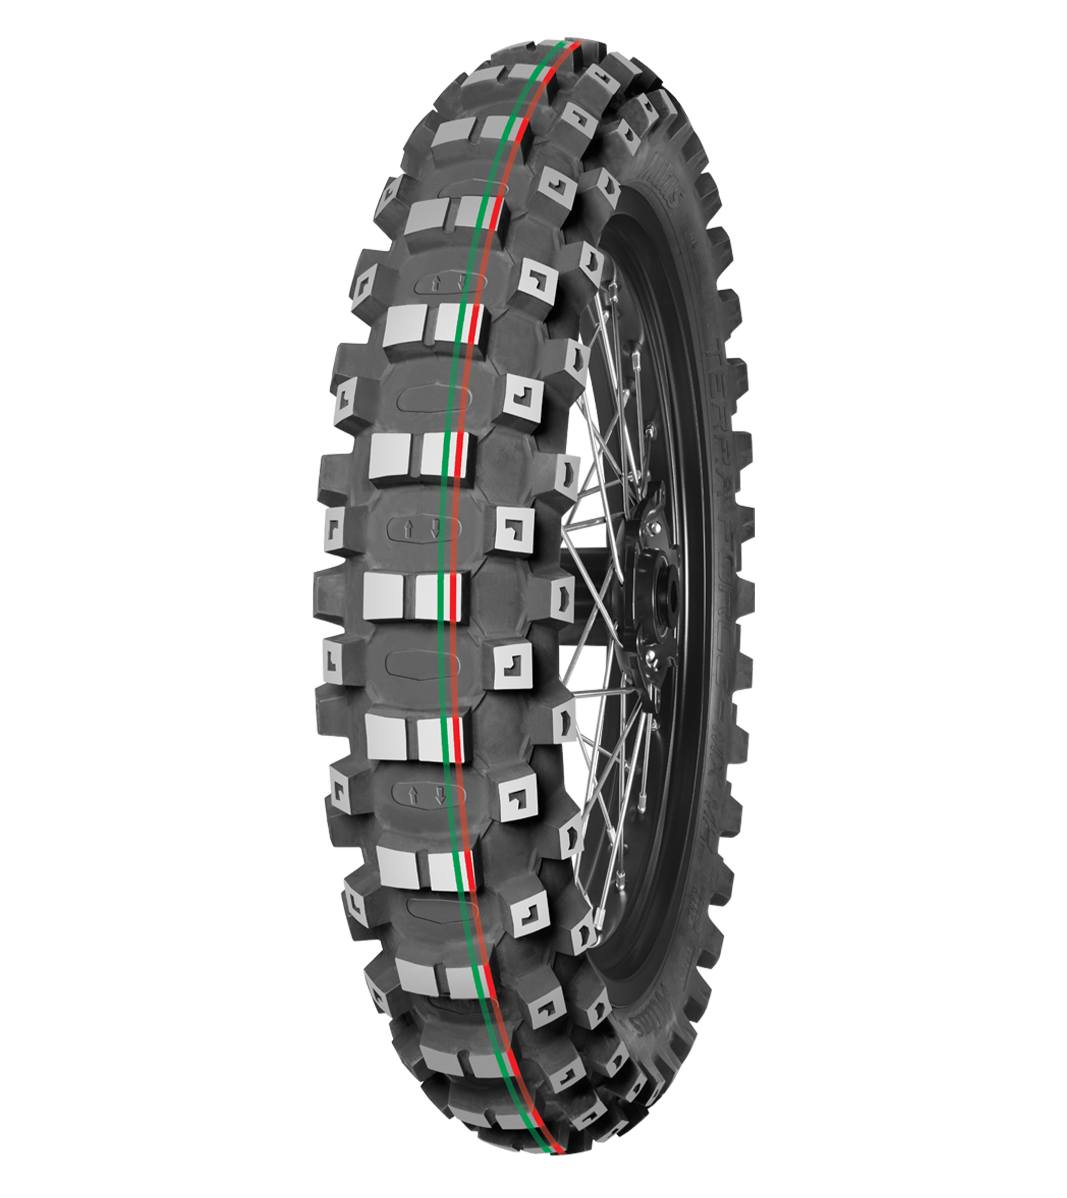 Mitas TERRA FORCE-MX MH 110/90-19 Motocross Competition Off-Road MEDIUM TO HARD 62M Red &amp; Green Tube Rear Tire, 226798, 110/90-19, Motocross, Motocross Competition, Off-Road, Rear, Terra Force, Terra Force-MX MH, Trail, Tires - Imported and distributed in North &amp; South America by Lindeco Genuine Powersports - Premier Powersports Equipment and Accessories for Motorcycle Enthusiasts, Professional Riders and Dealers.